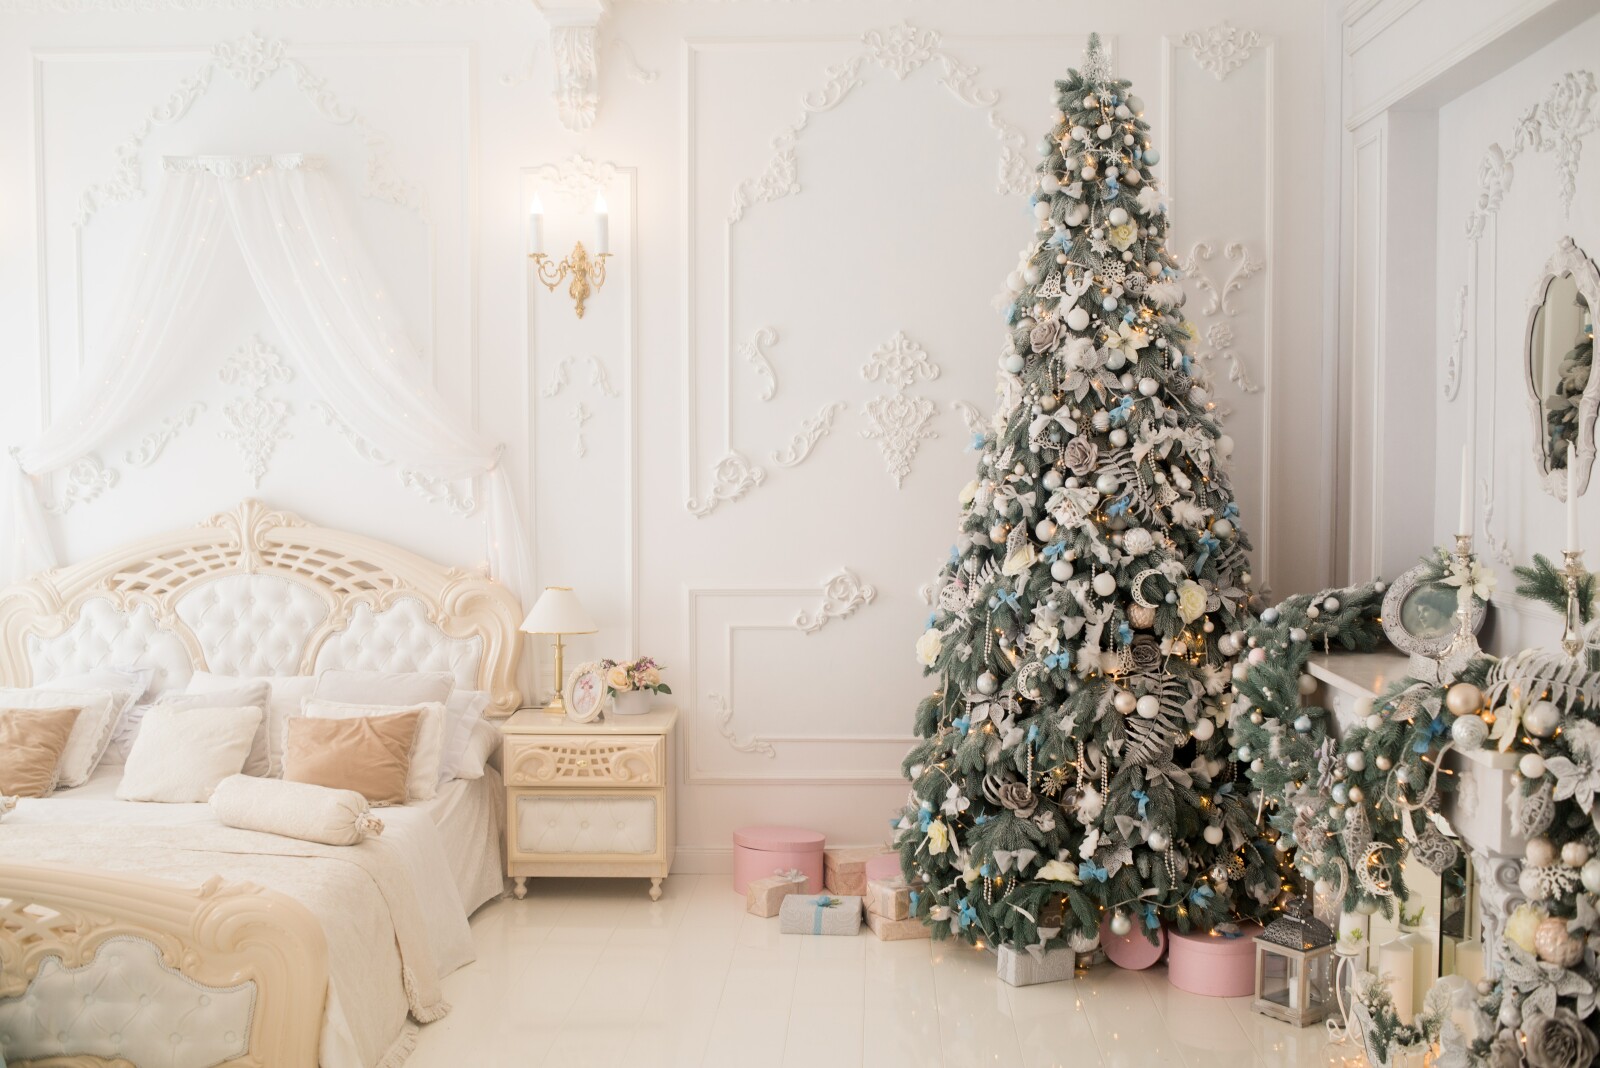 How to Decorate a Magazine-Worthy Christmas Tree